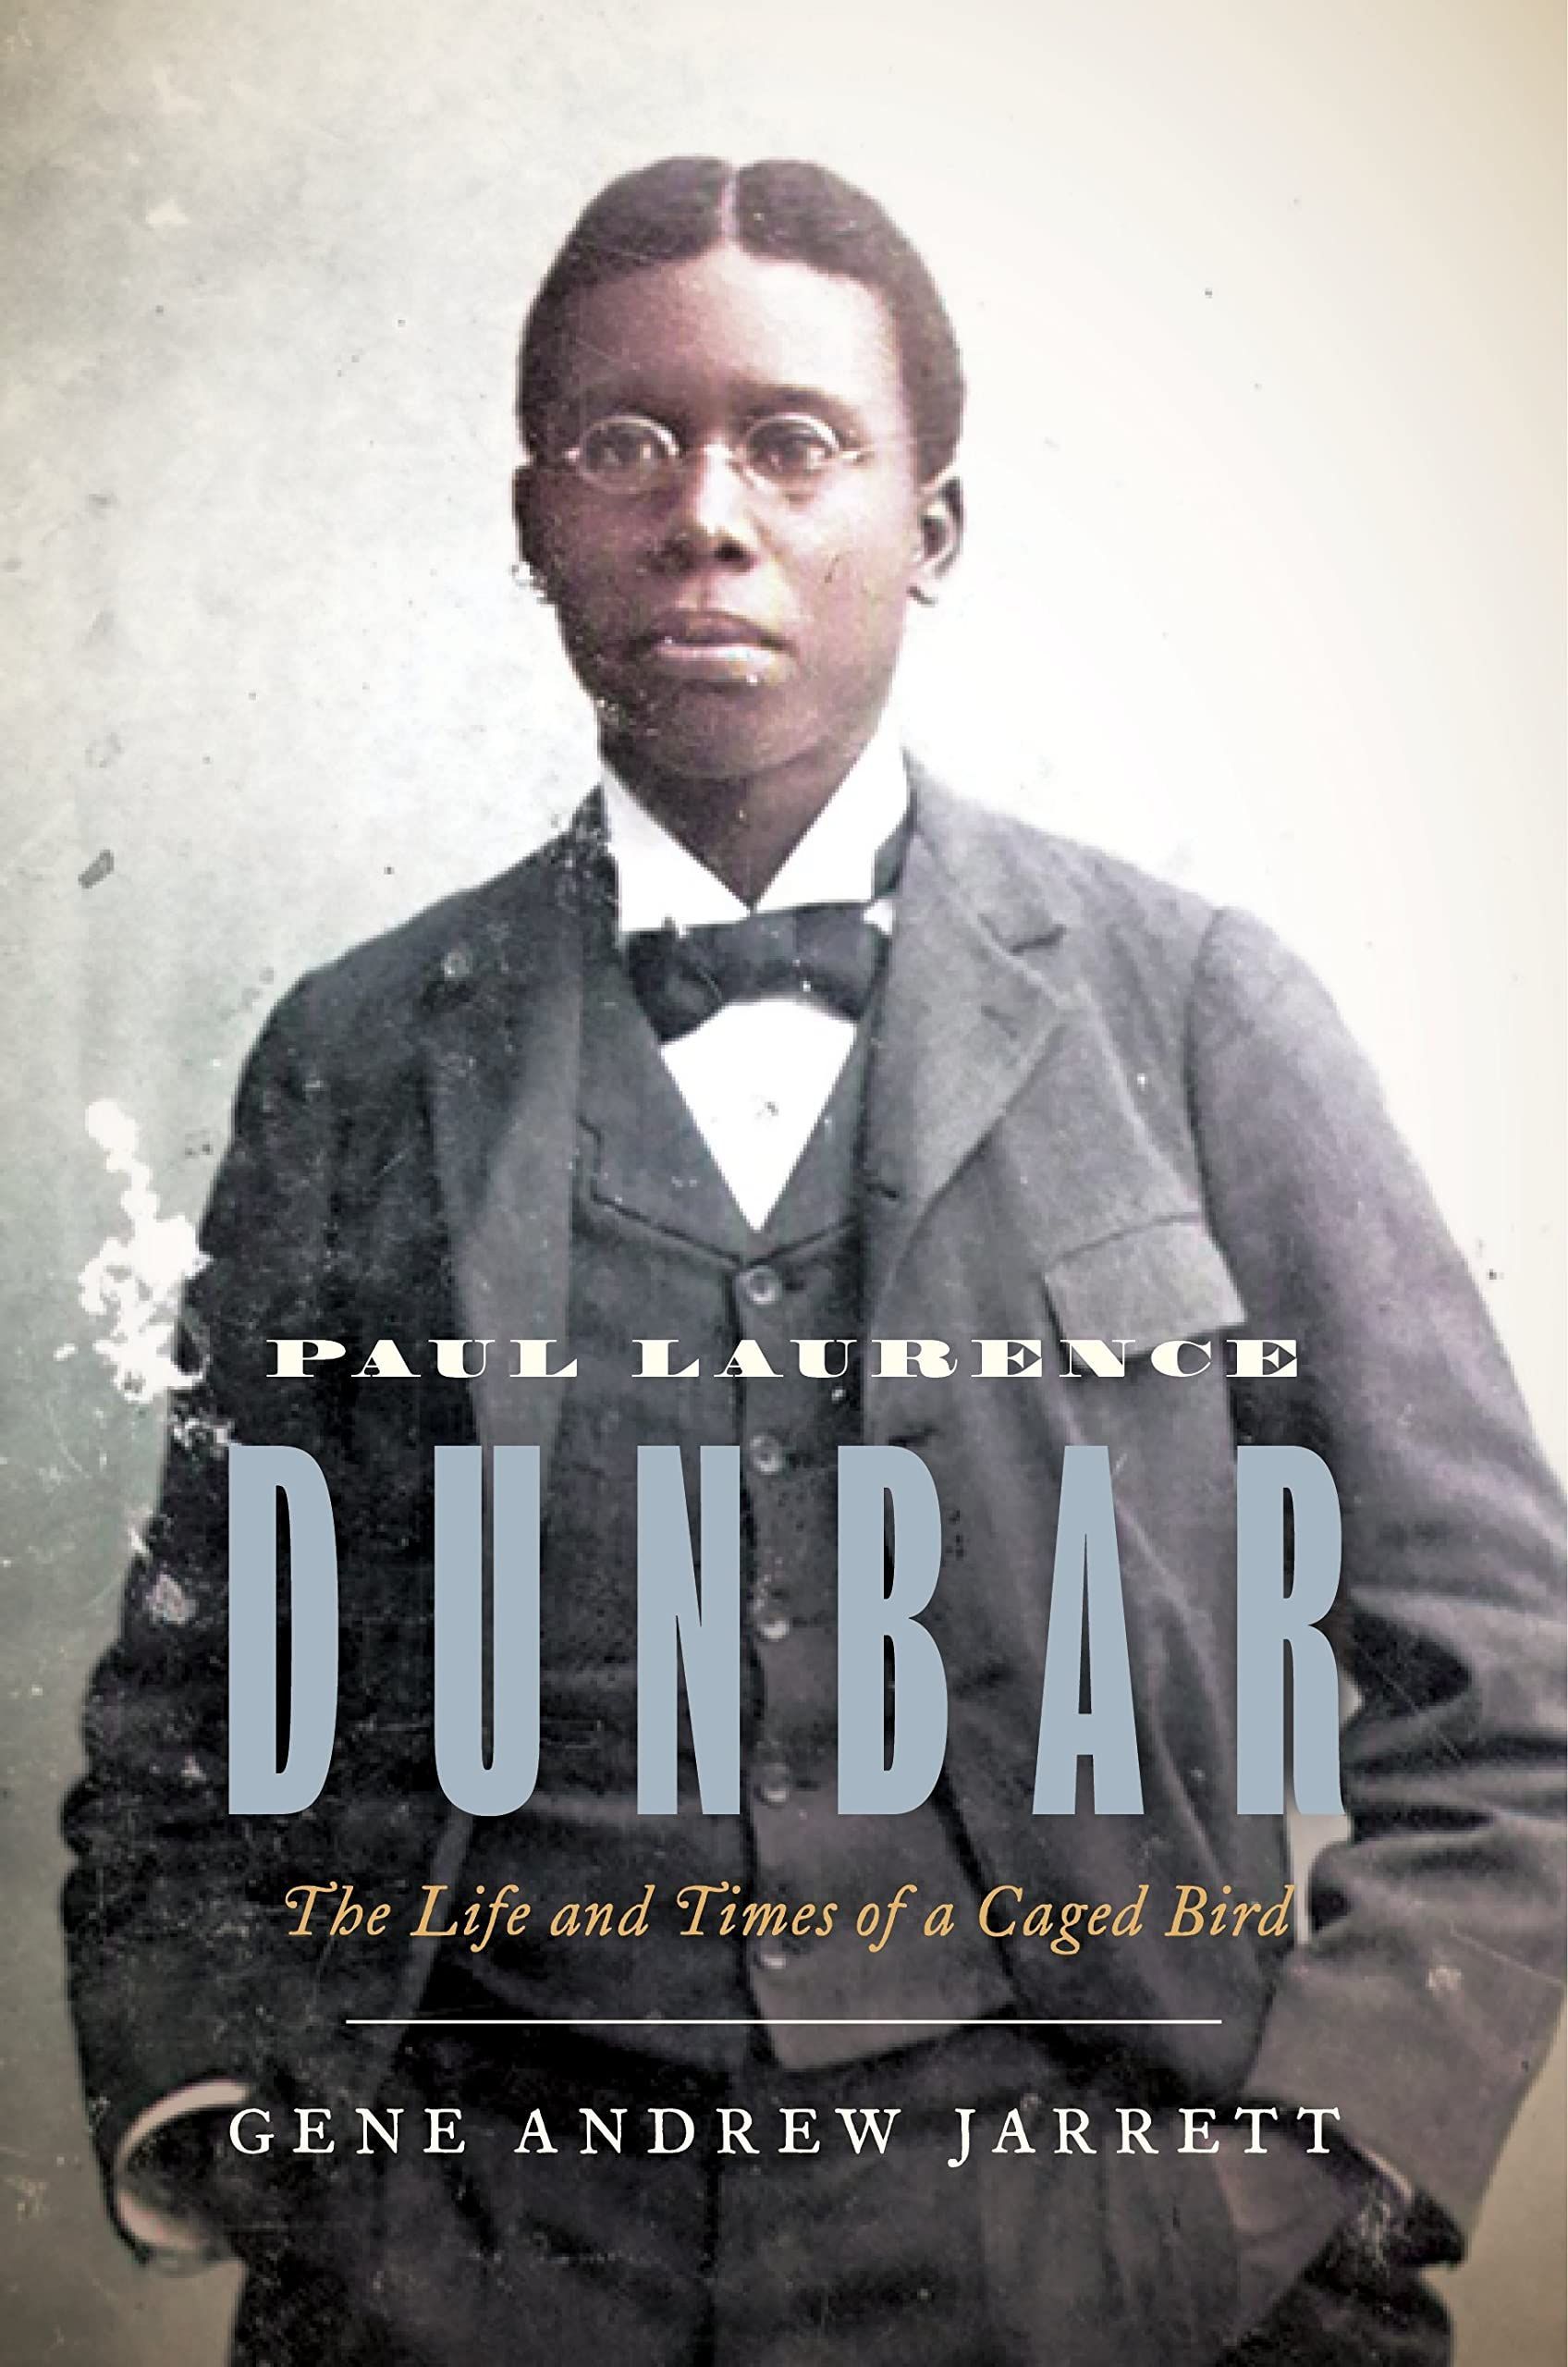 The Legacy of a Caged Bird: On Gene Andrew Jarrett’s “Paul Laurence Dunbar”